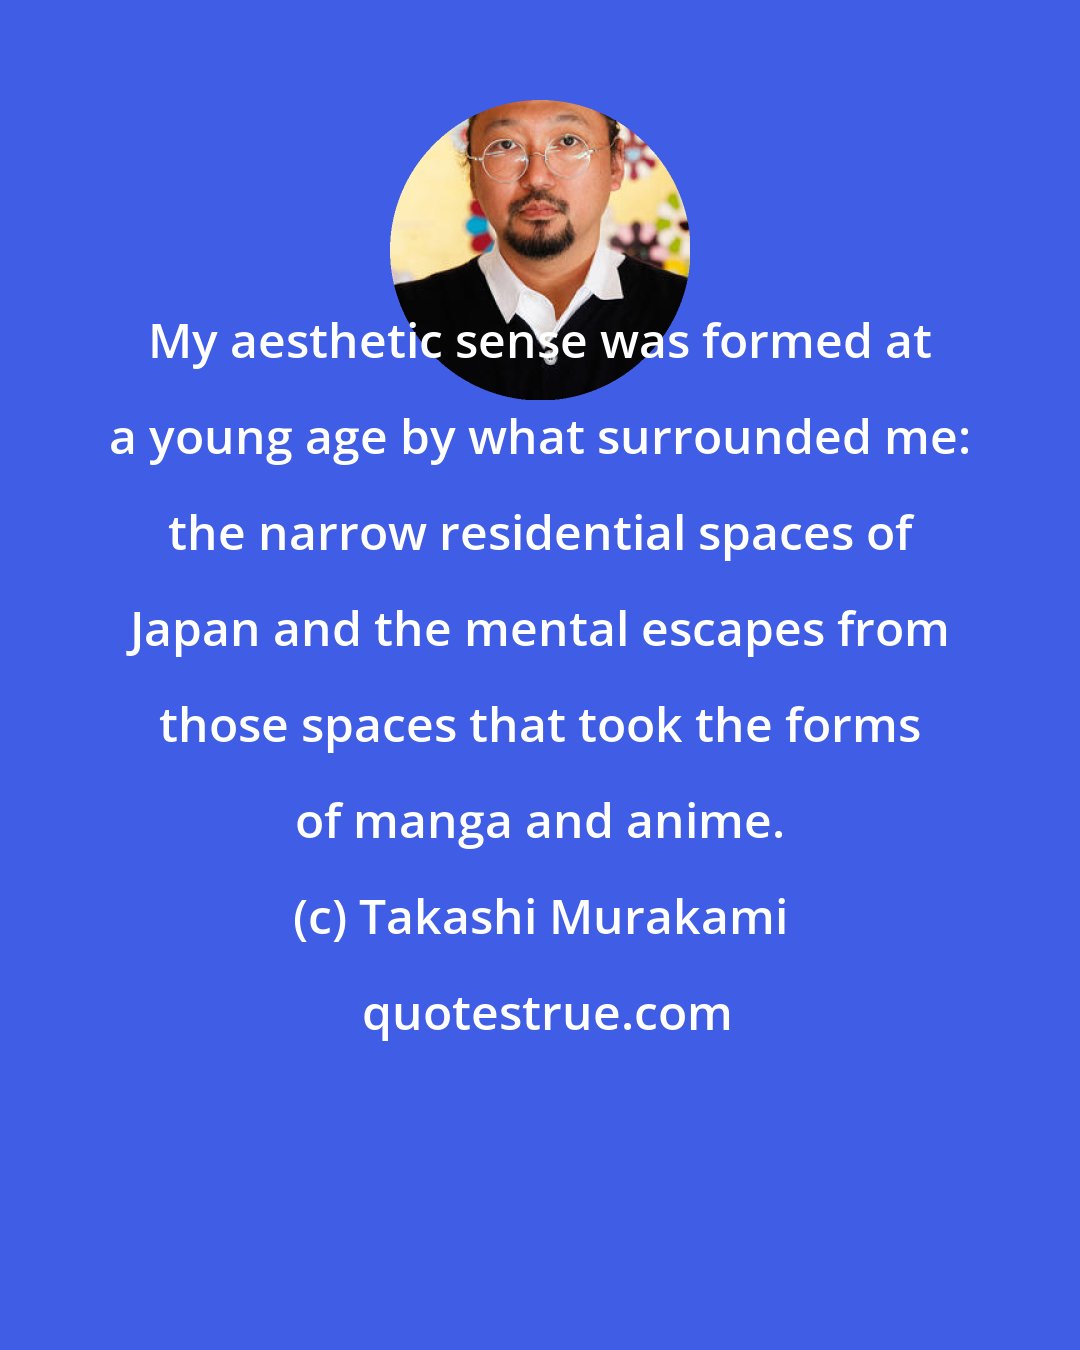 Takashi Murakami: My aesthetic sense was formed at a young age by what surrounded me: the narrow residential spaces of Japan and the mental escapes from those spaces that took the forms of manga and anime.